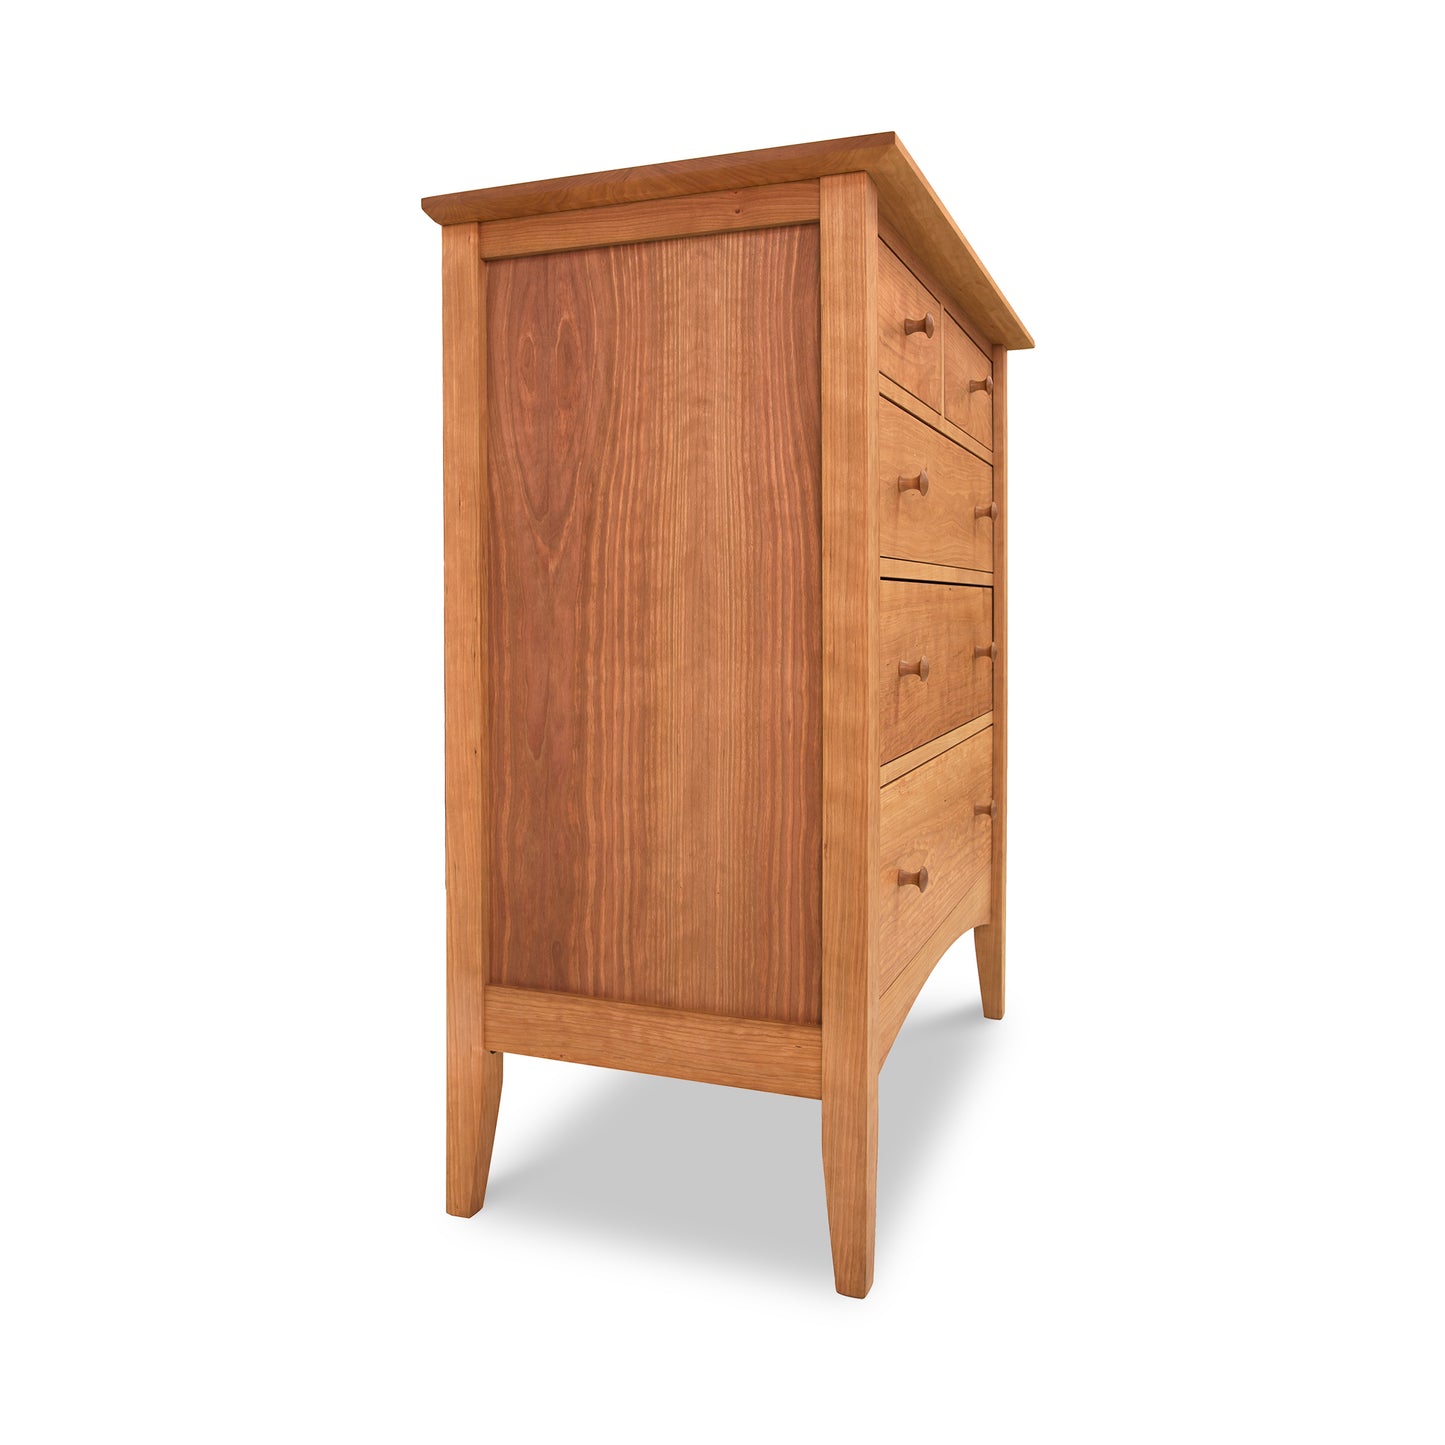 American Shaker 5-Drawer Chest from Maple Corner Woodworks with three drawers on the right side, standing against a white background.